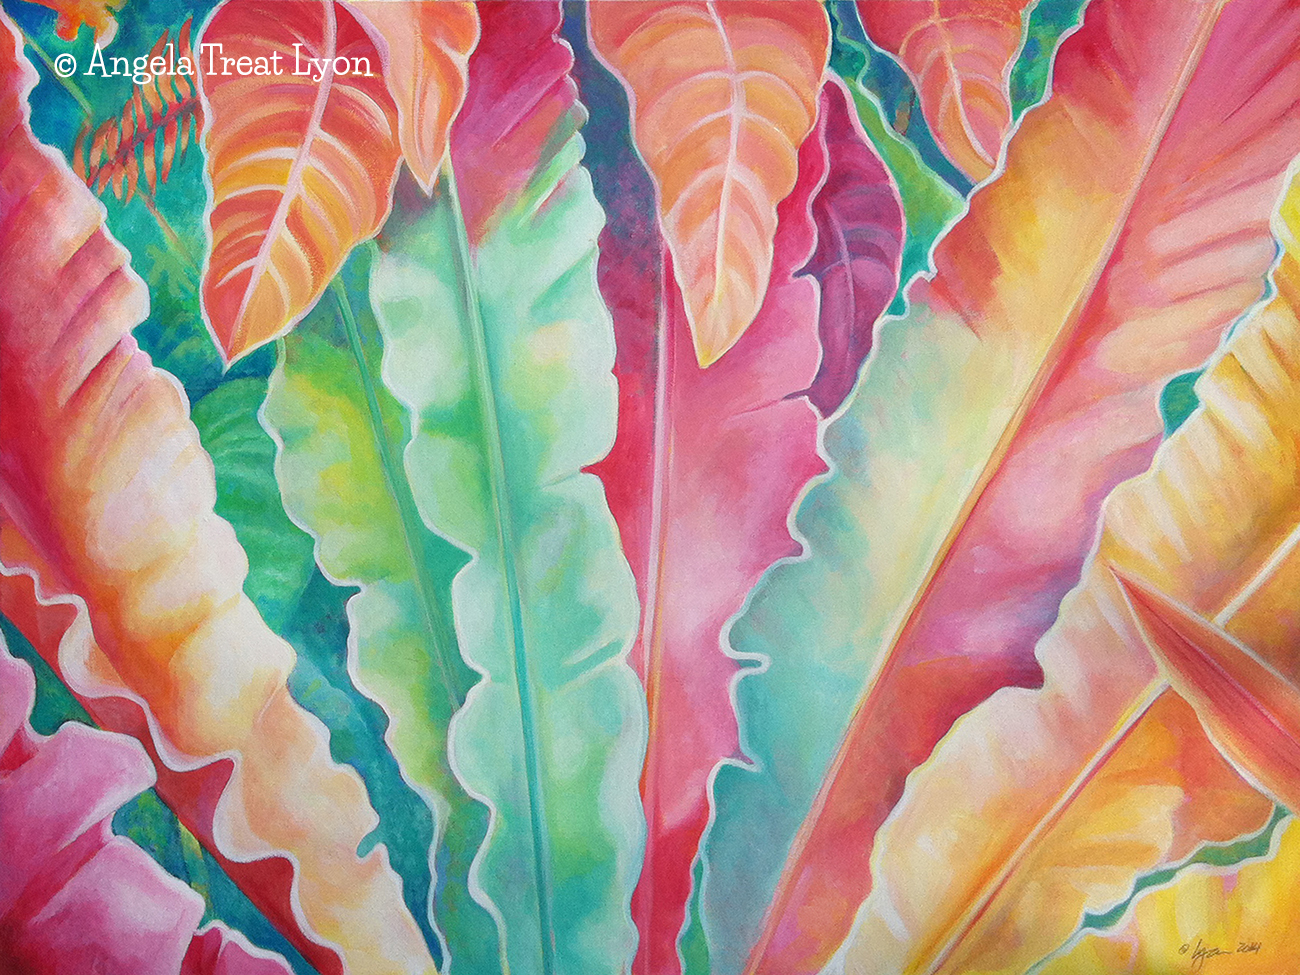 Colorful abstractish painting of birds nest fern leaves